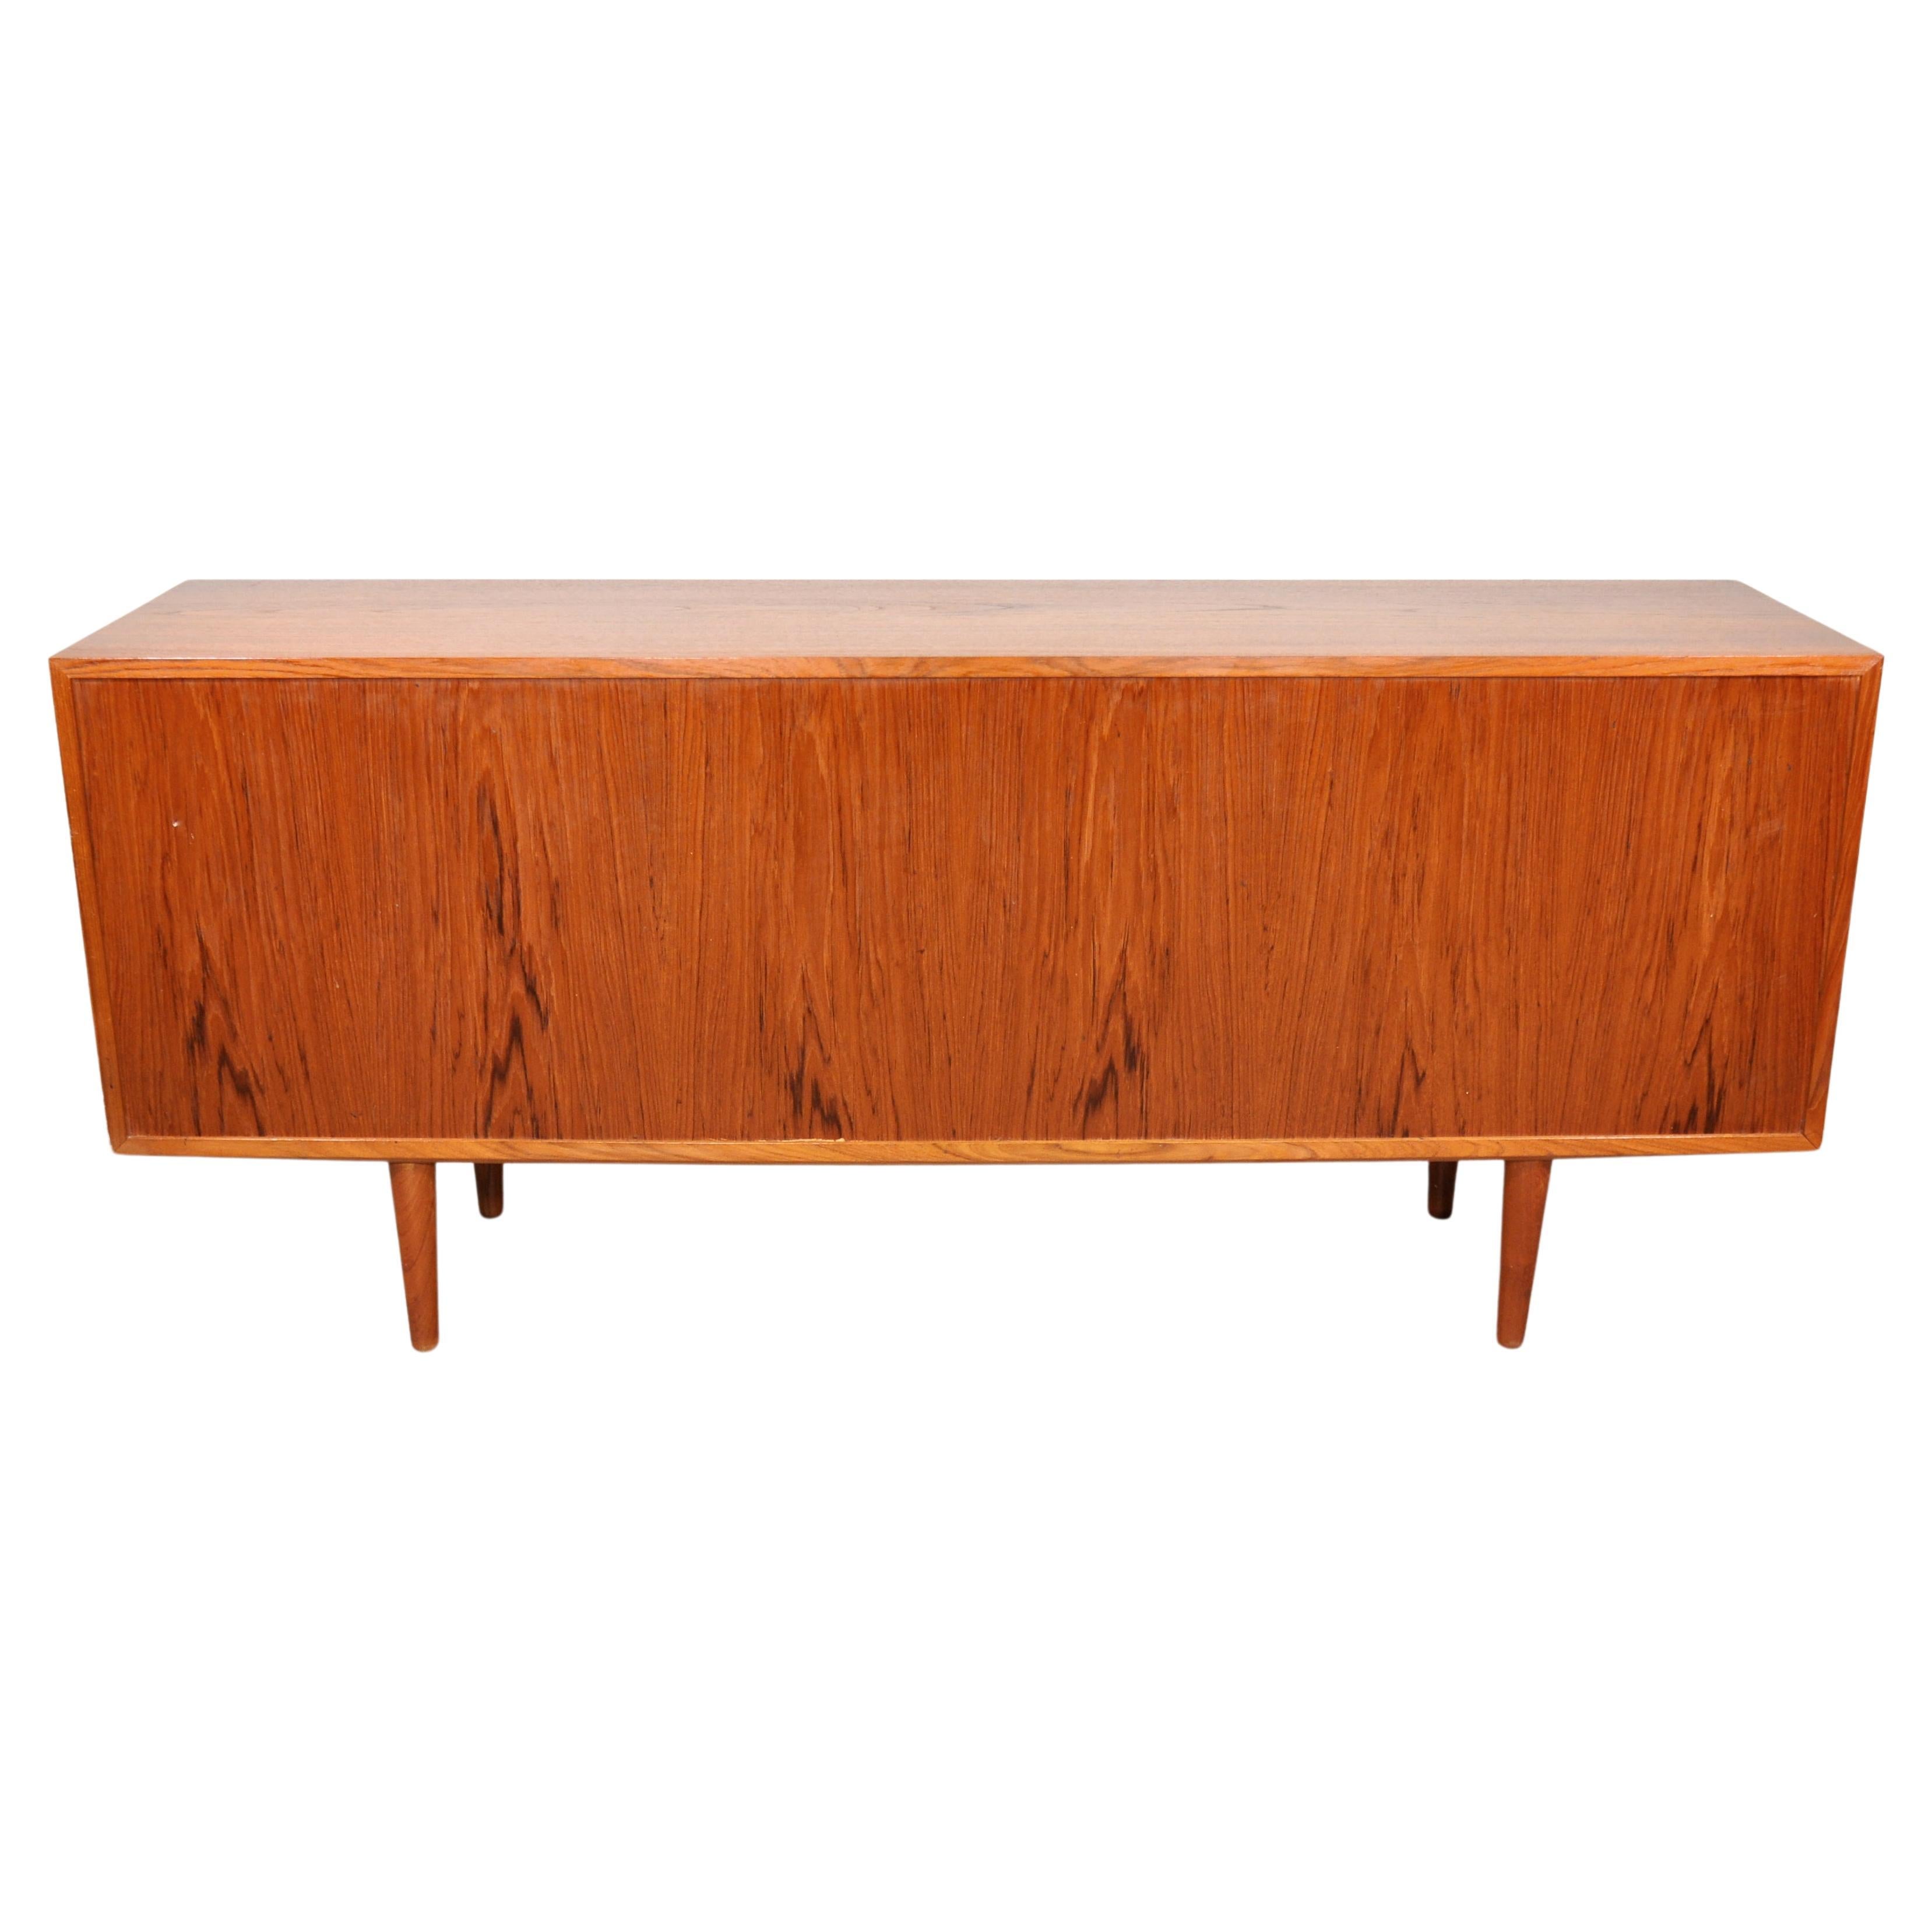 All original gorgeous Mid-Century Modern teak and maple cabinet from the 1960s. The vintage Danish sideboard features a pair of sliding doors, each with a sculpted teak handle, opening to a maple interior fitted with three adjustable shelves, a